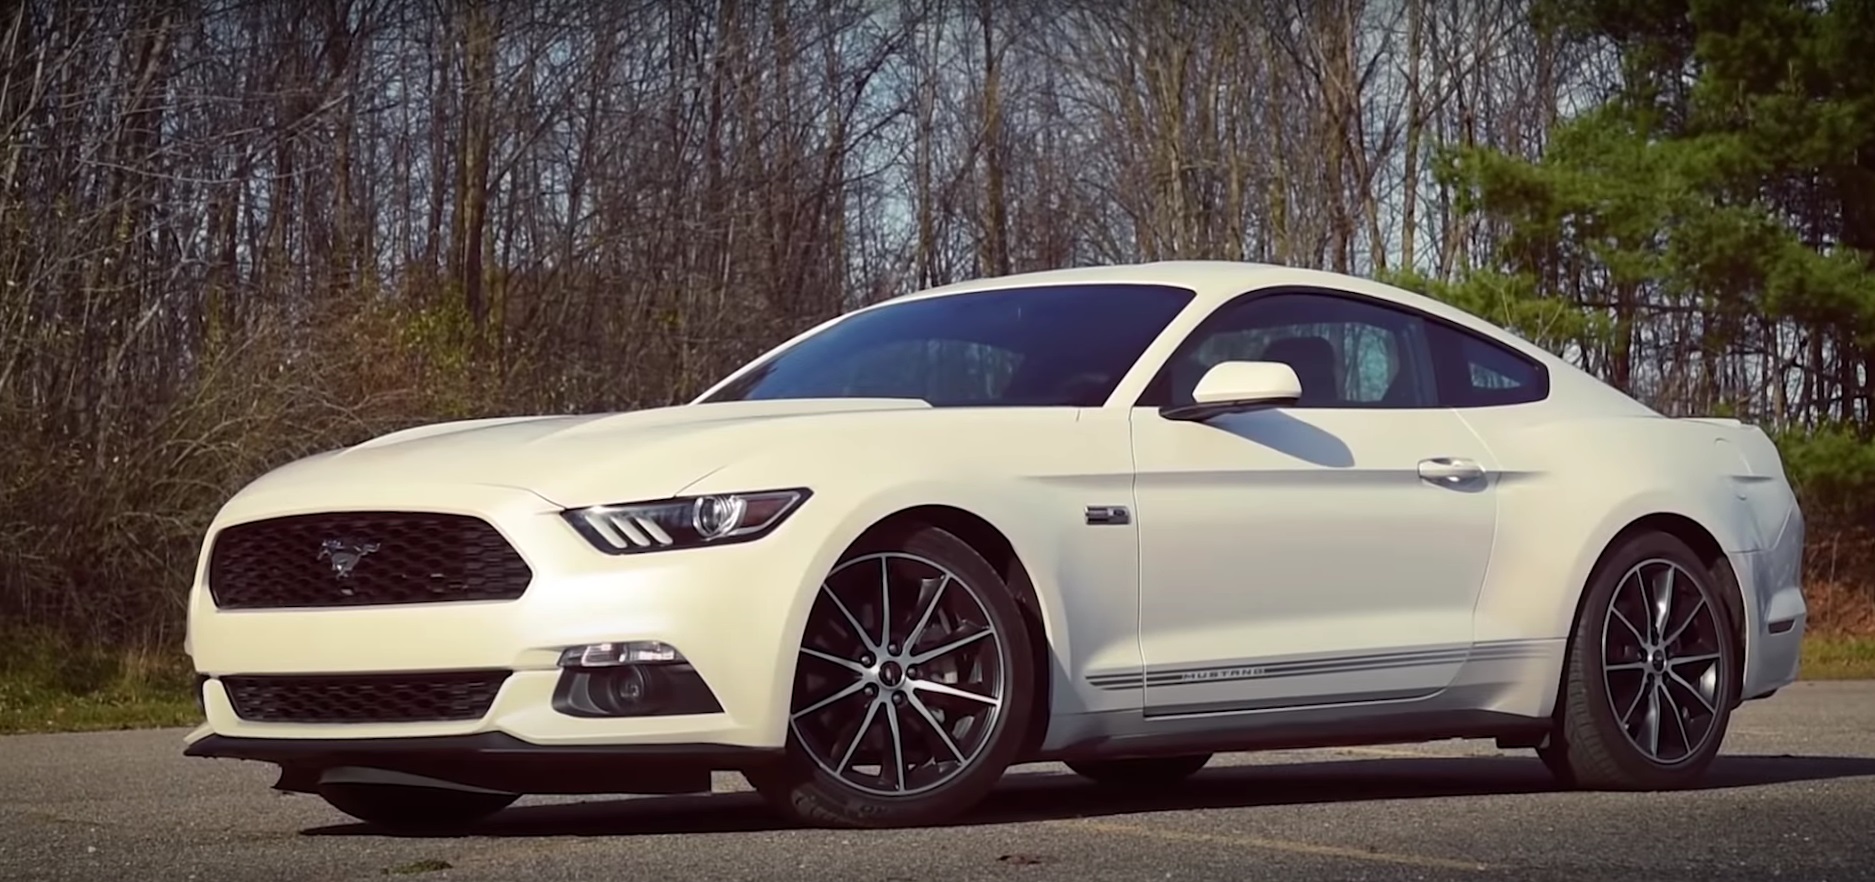 Video: 2017 Ford Mustang EcoBoost Performance Review - How Are the Warranty-Approved Performance Parts?